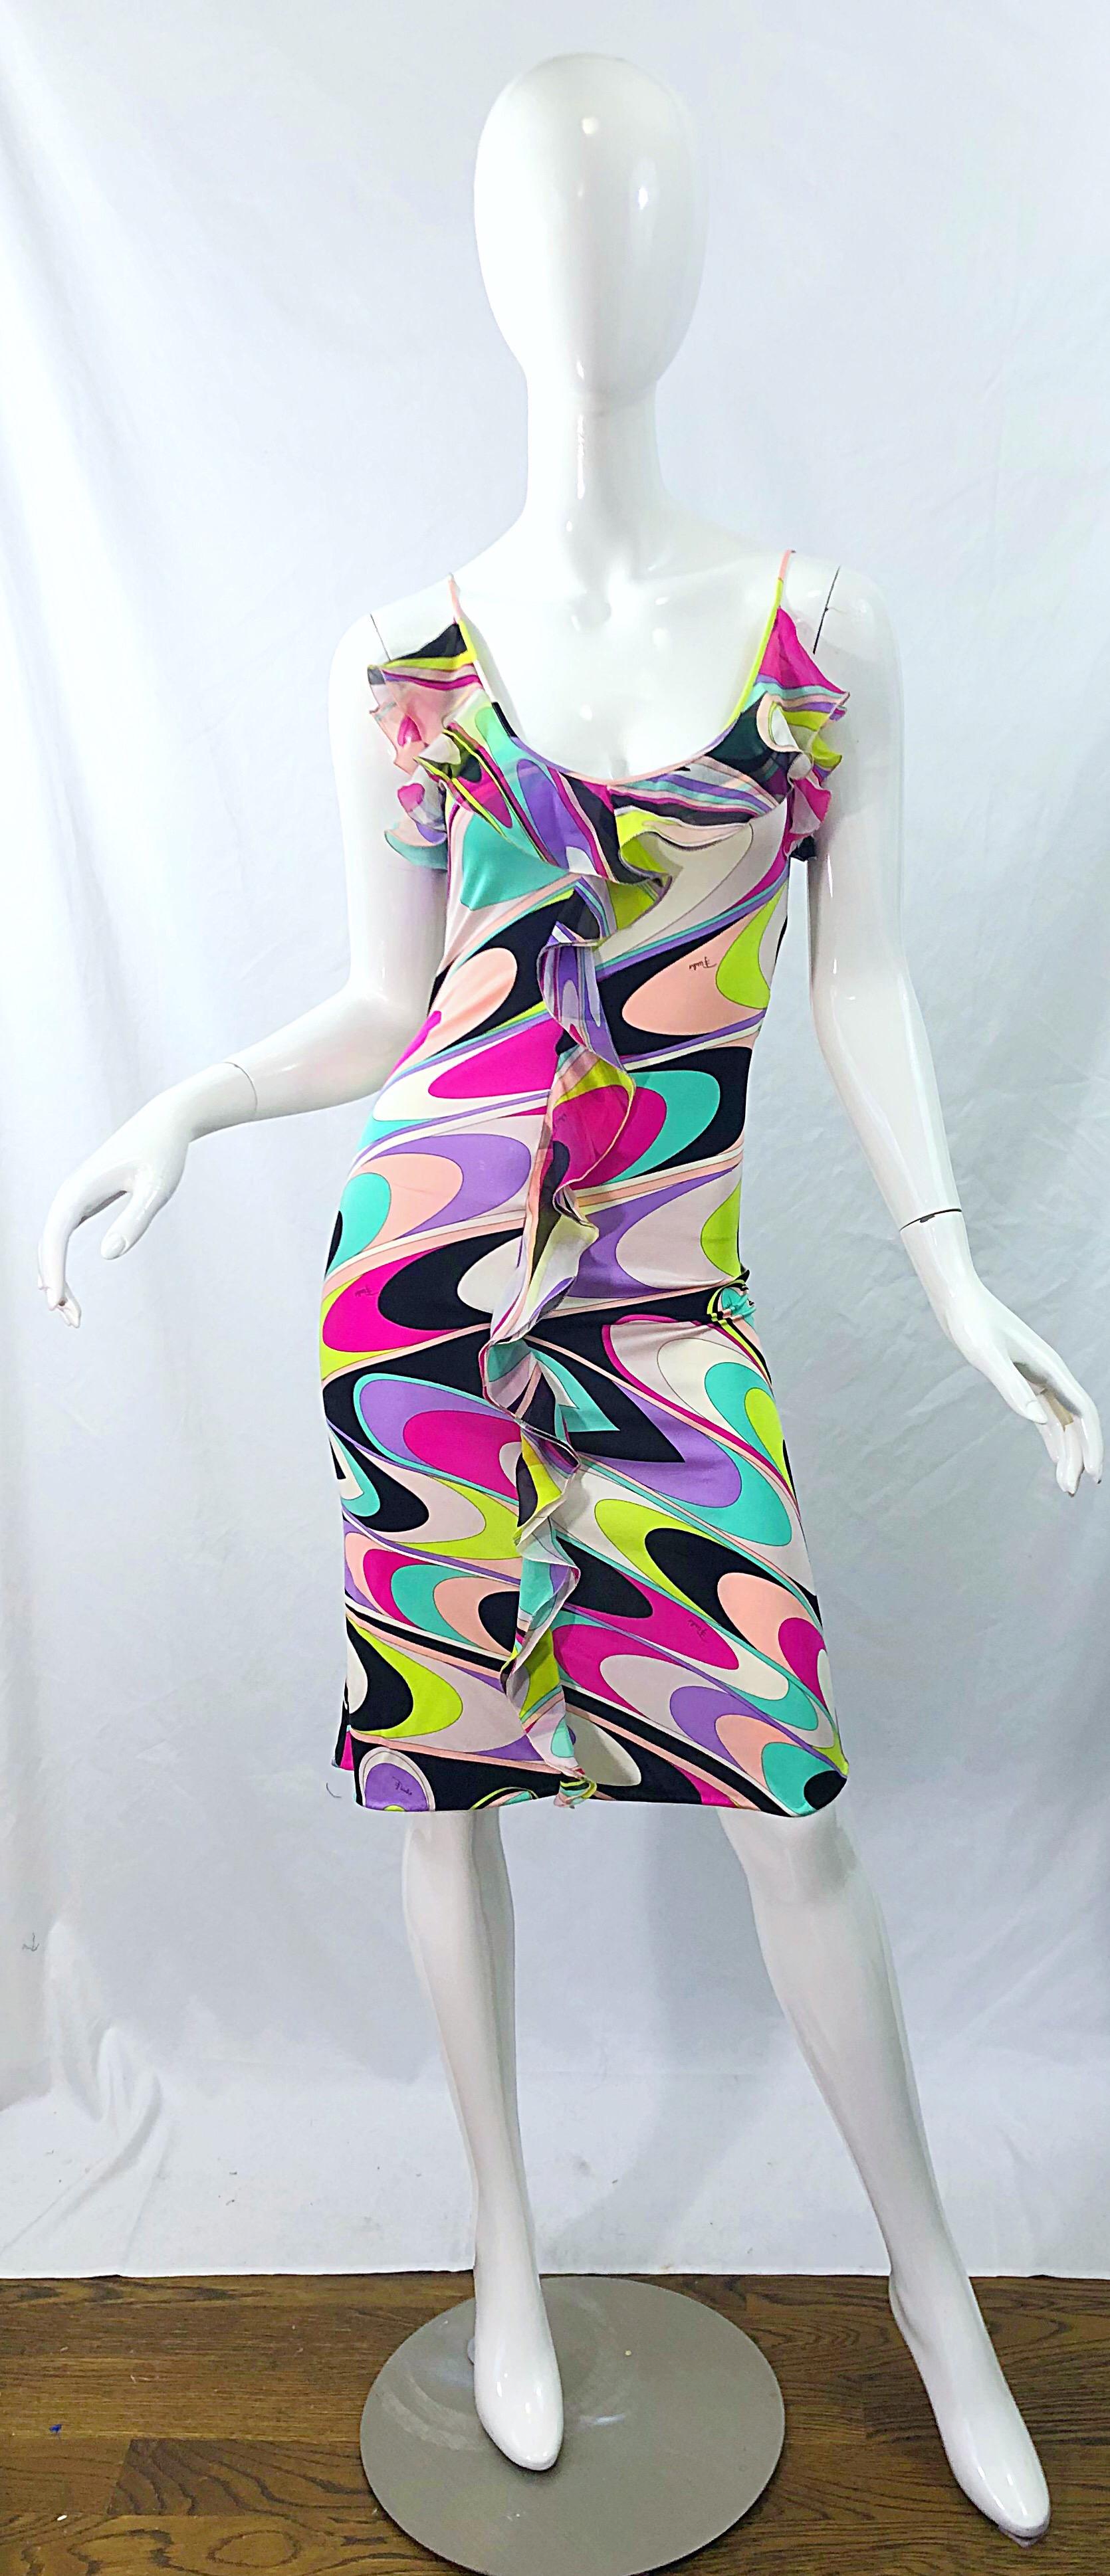 Beautiful late 90s EMILIO PUCCI Size 8 signature kaleidoscope print silk jersey sleeveless spaghetti strap dress! Features vibrant colors of hot pink, light purple lavender, neon lime green, turquoise blue, black, white and light pink throughout.